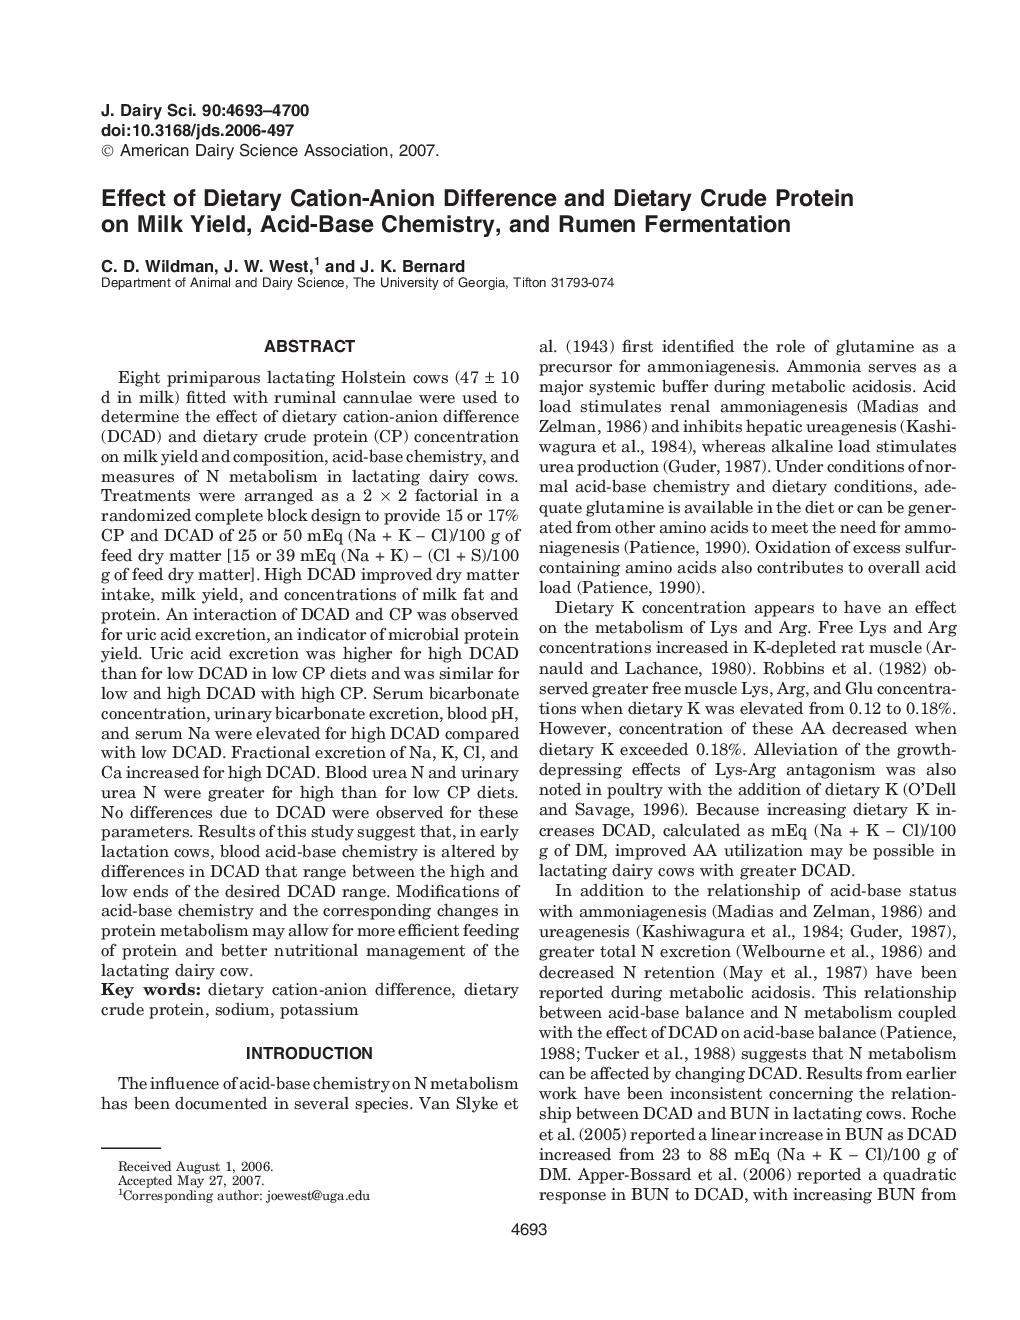 Effect of Dietary Cation-Anion Difference and Dietary Crude Protein on Milk Yield, Acid-Base Chemistry, and Rumen Fermentation